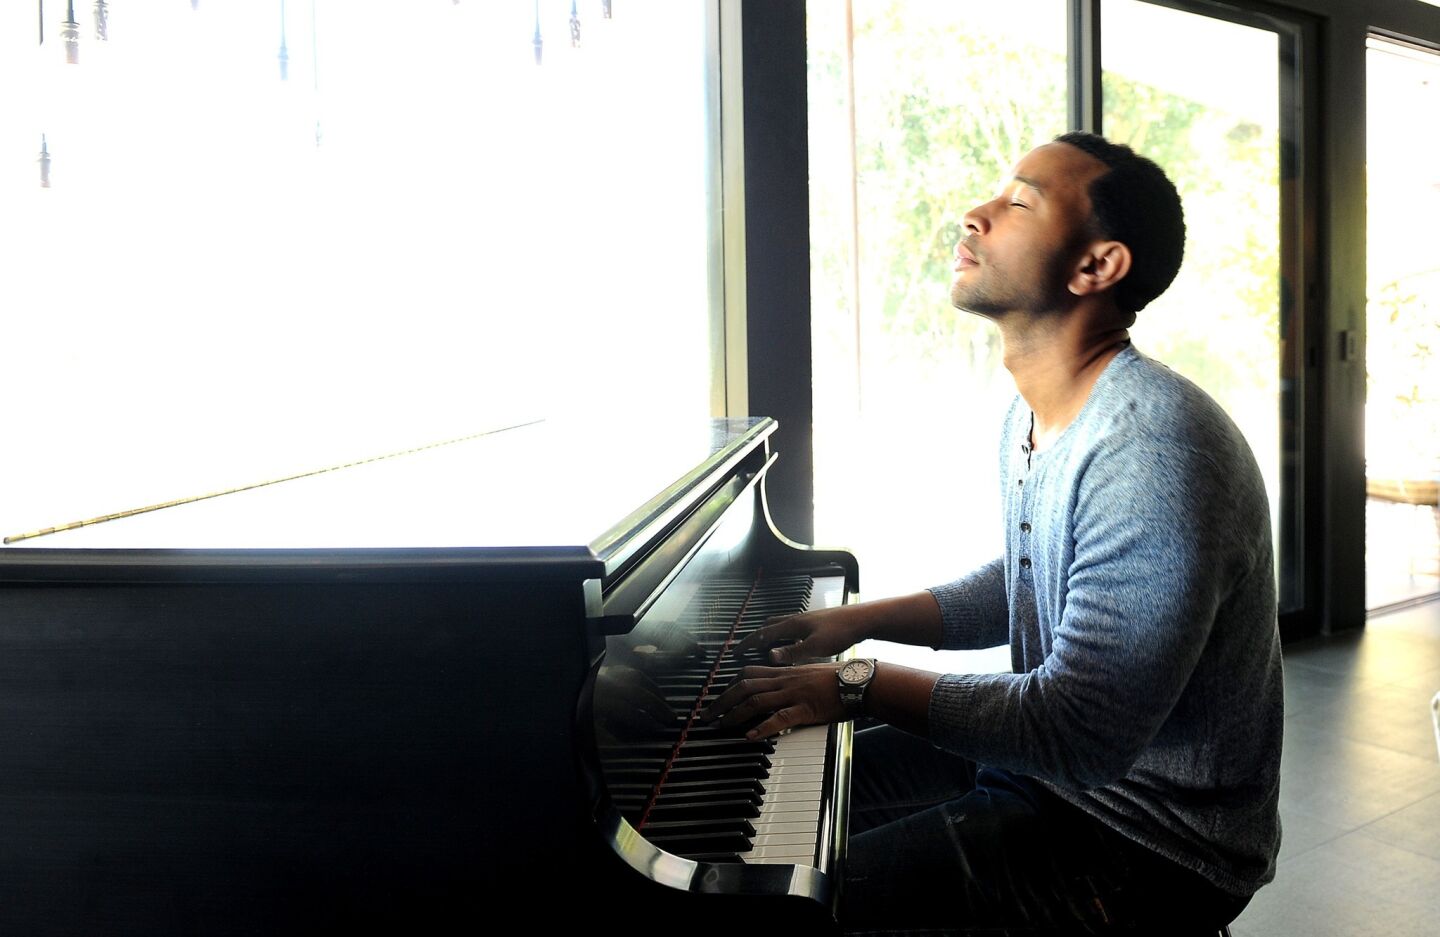 R&B singer John Legend plays the piano at his home in Los Angeles and will be coming out with a new album, "Love in the Future."